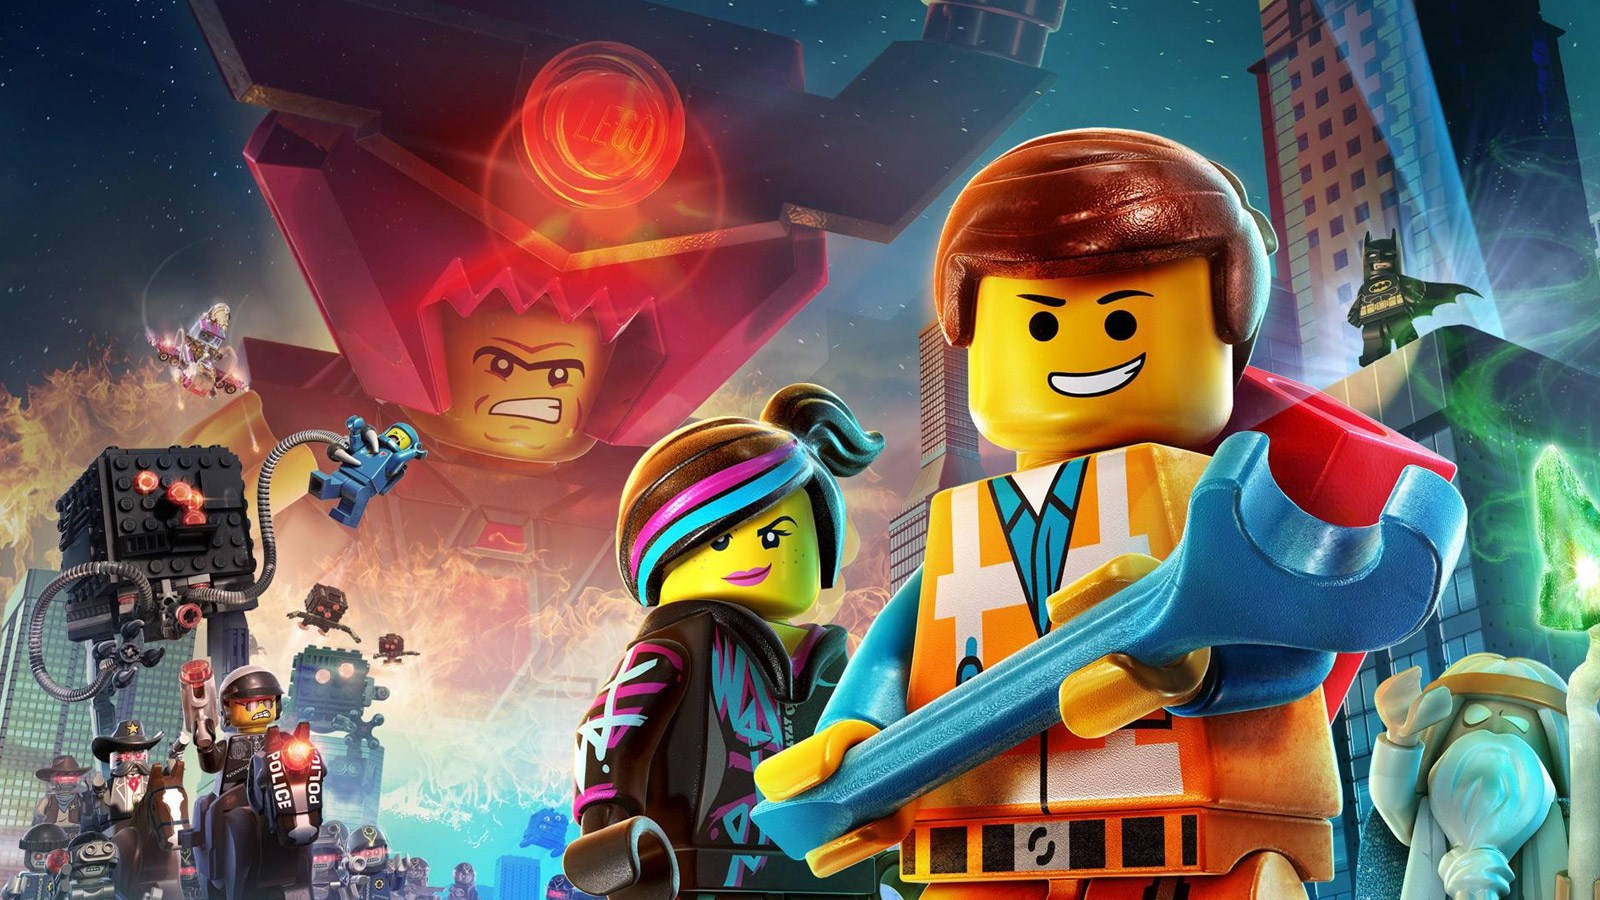 Awesome The Lego Movie Poster Characters Wallpaper